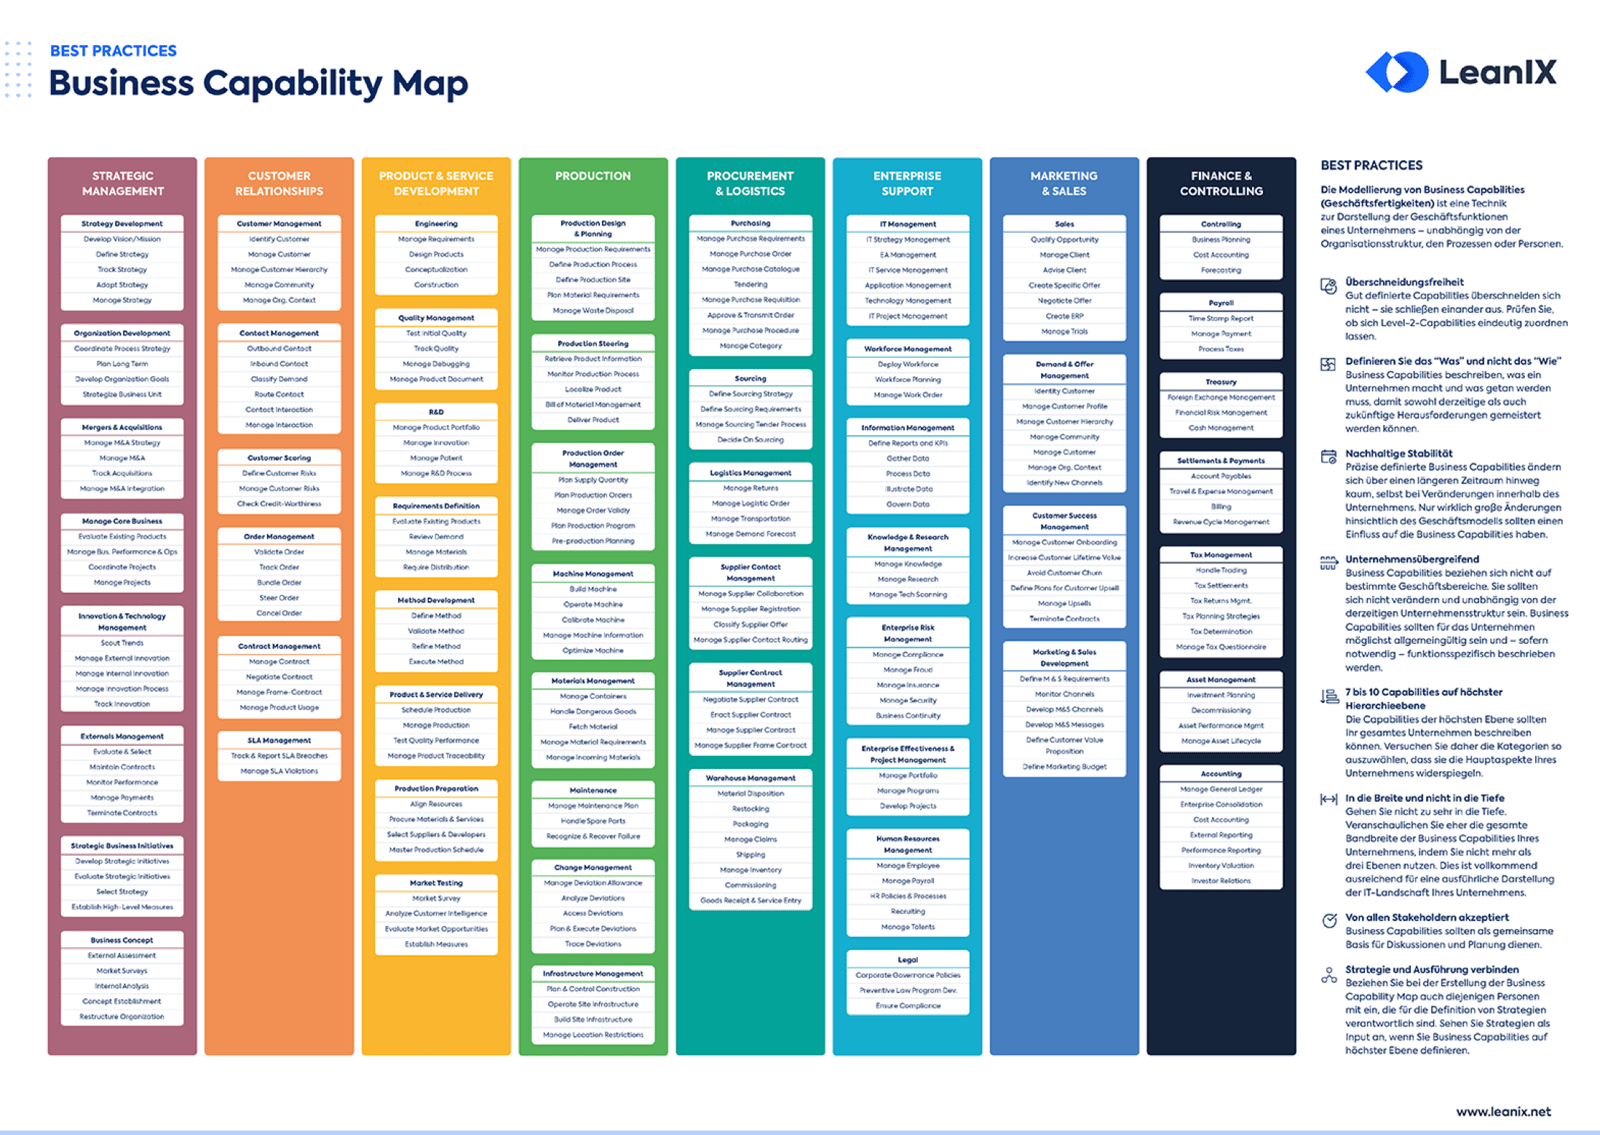 Gratis poster - Business Capability Maps, Best Practices 